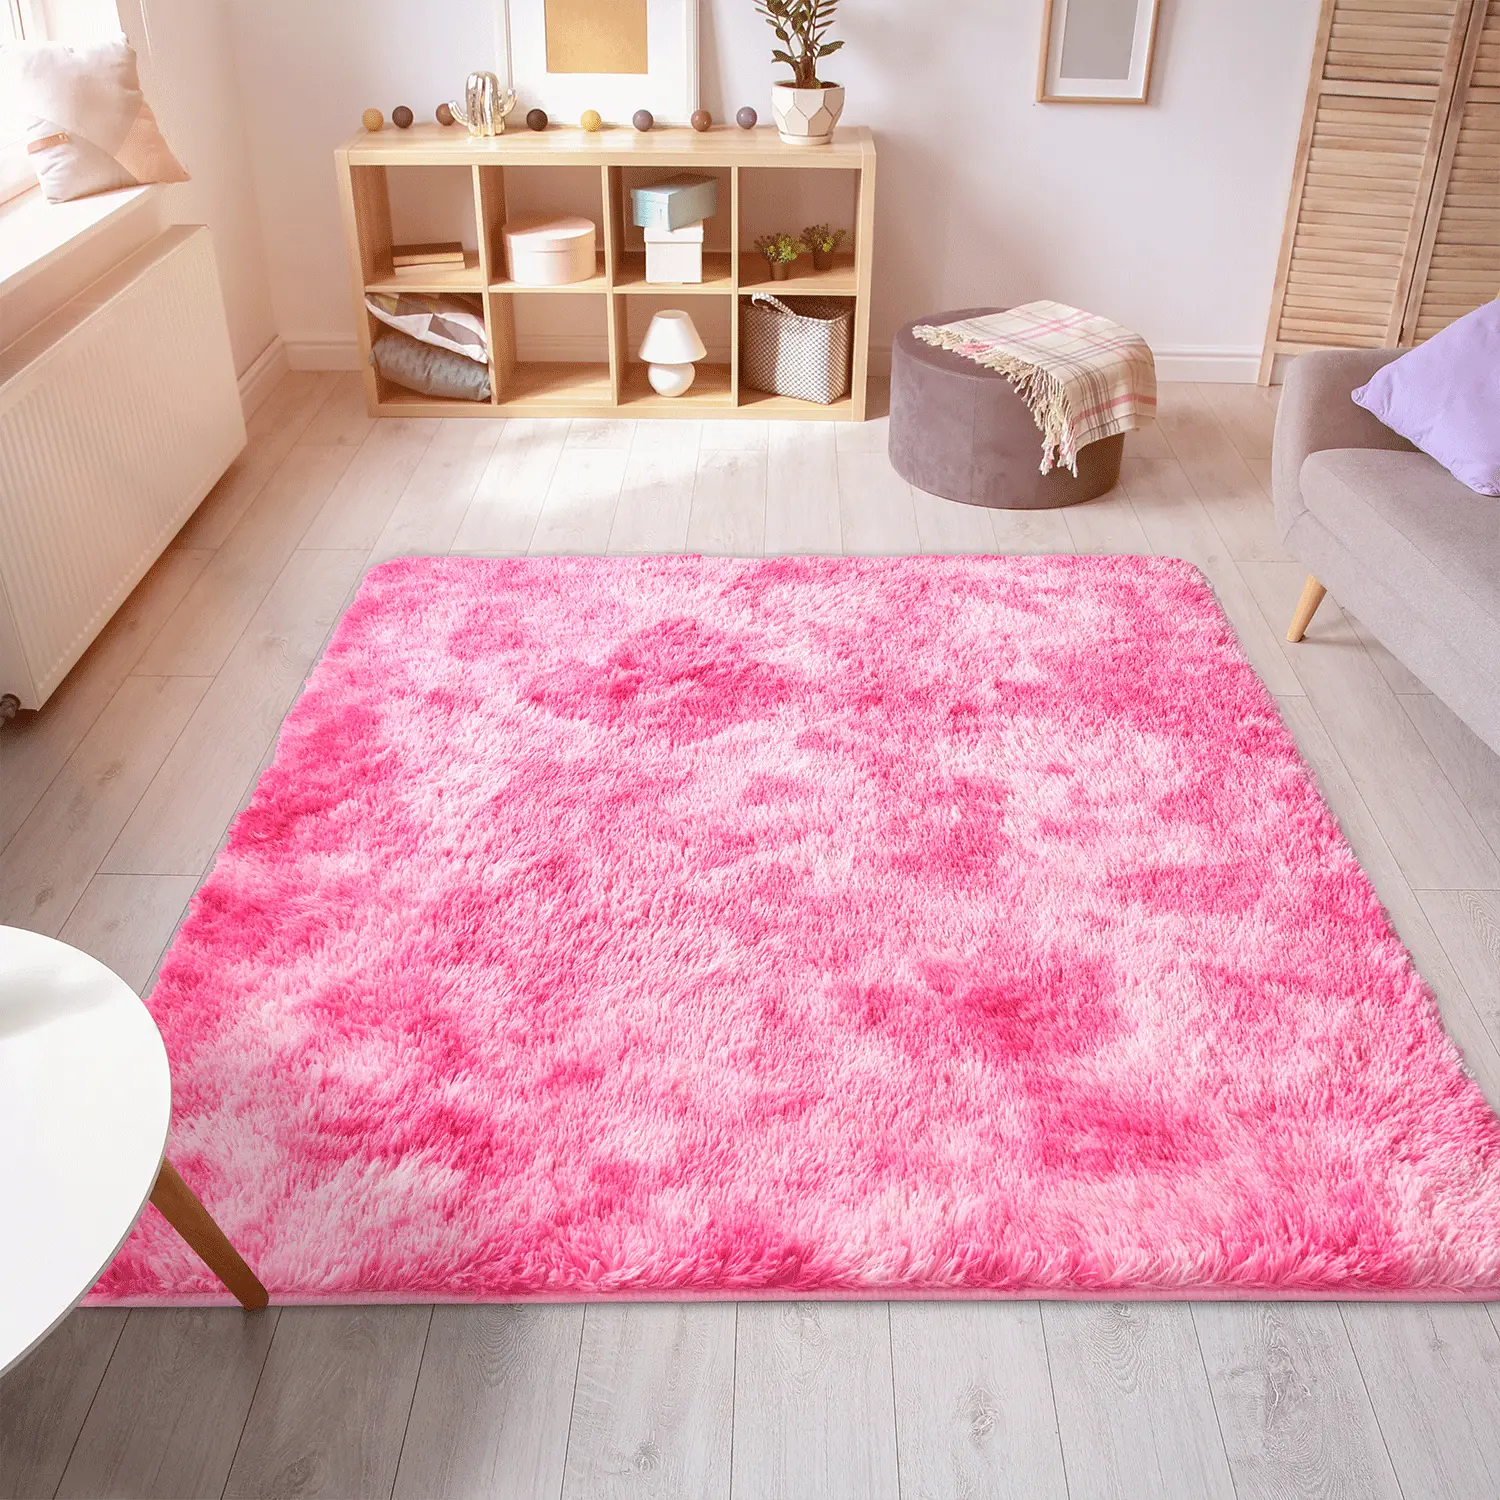 Merry Home Living Room Fuzzy Area Rugs for Bedroom Fluffy for Kids Room, Floor Indoor Shaggy Plush 